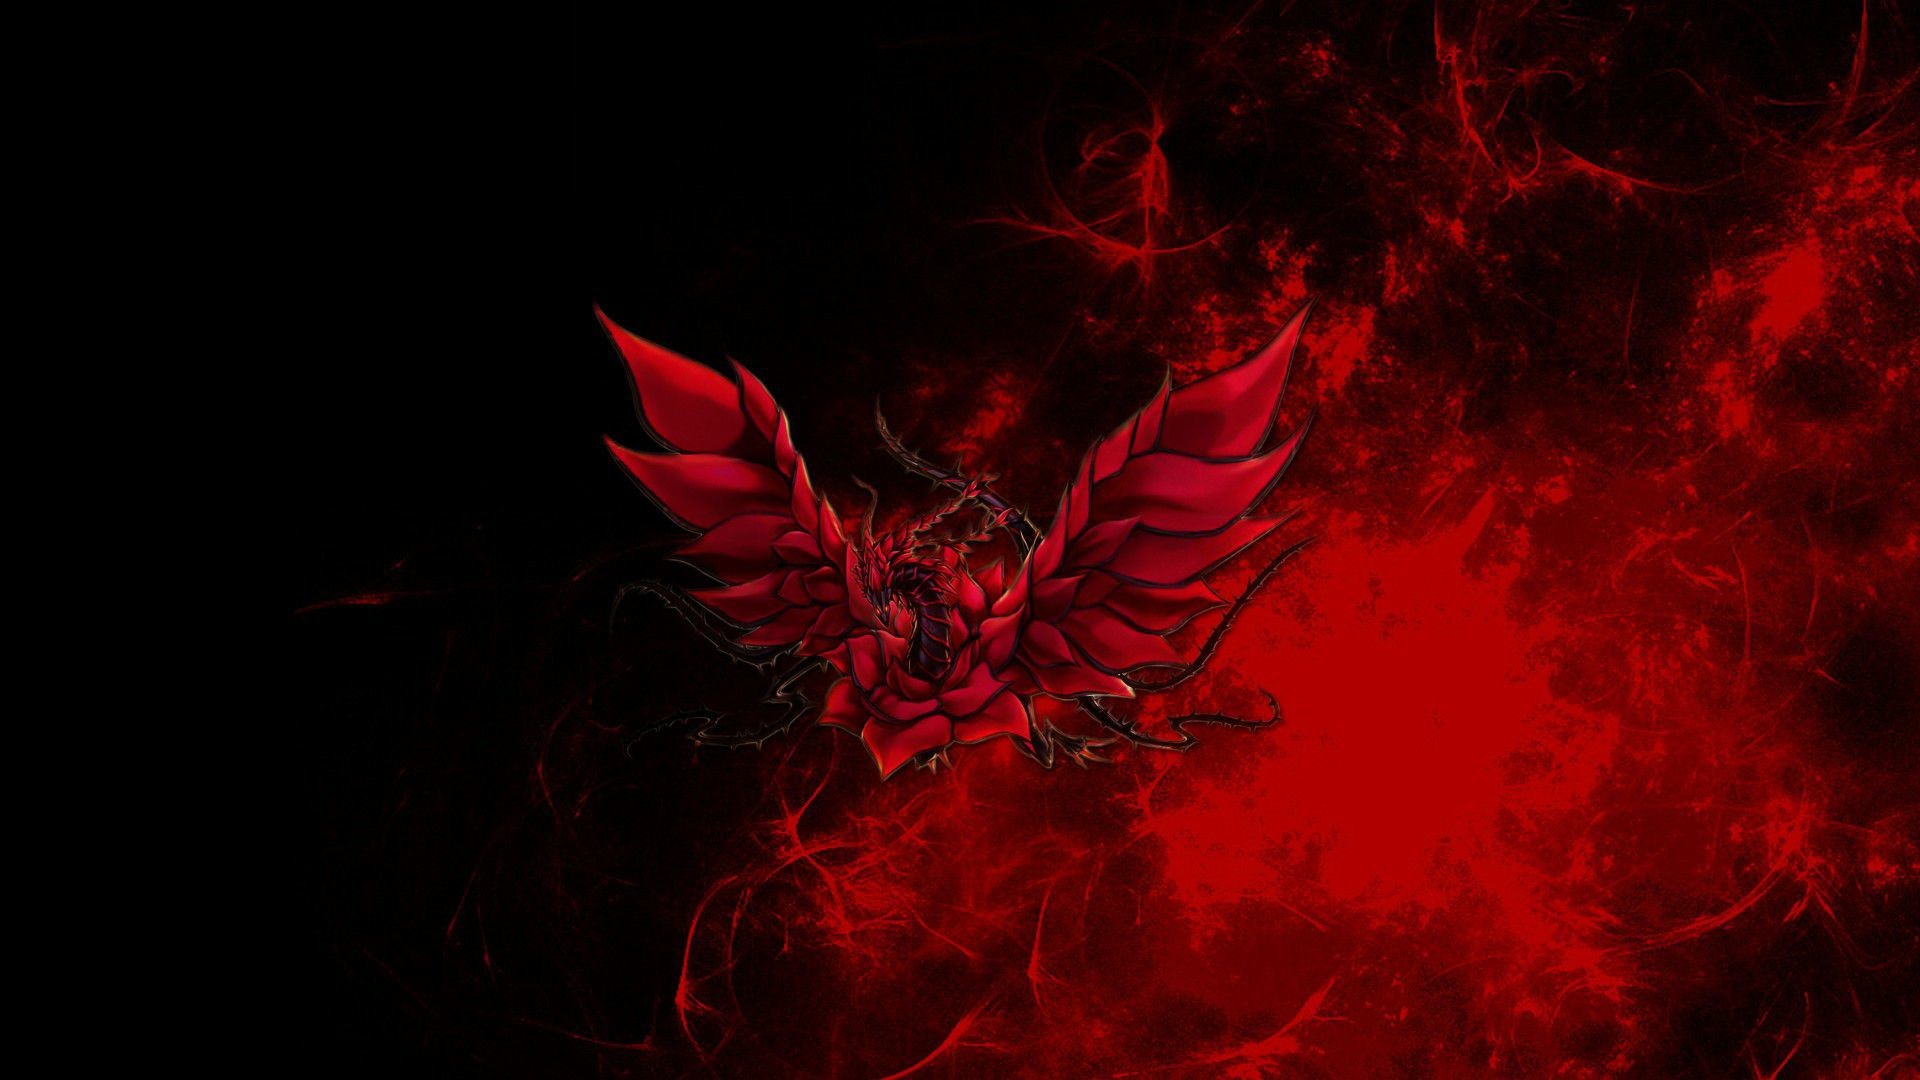 1920x1080 Related Wallpapers. black red dragon hd images